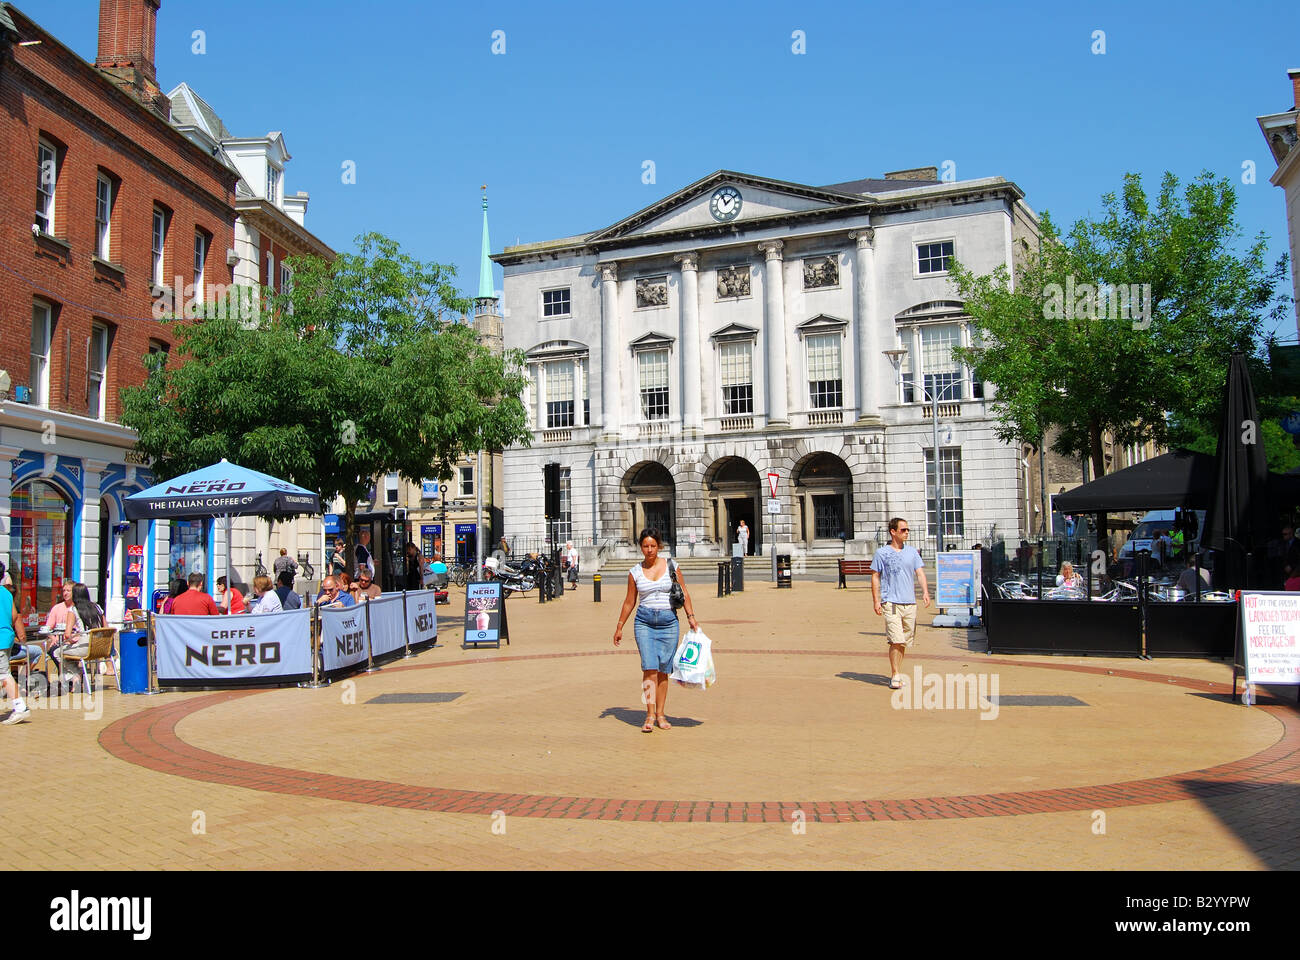 Shire Hall from pedestrianised High Street, Chelmsford, Essex, England, United Kingdom Stock Photo